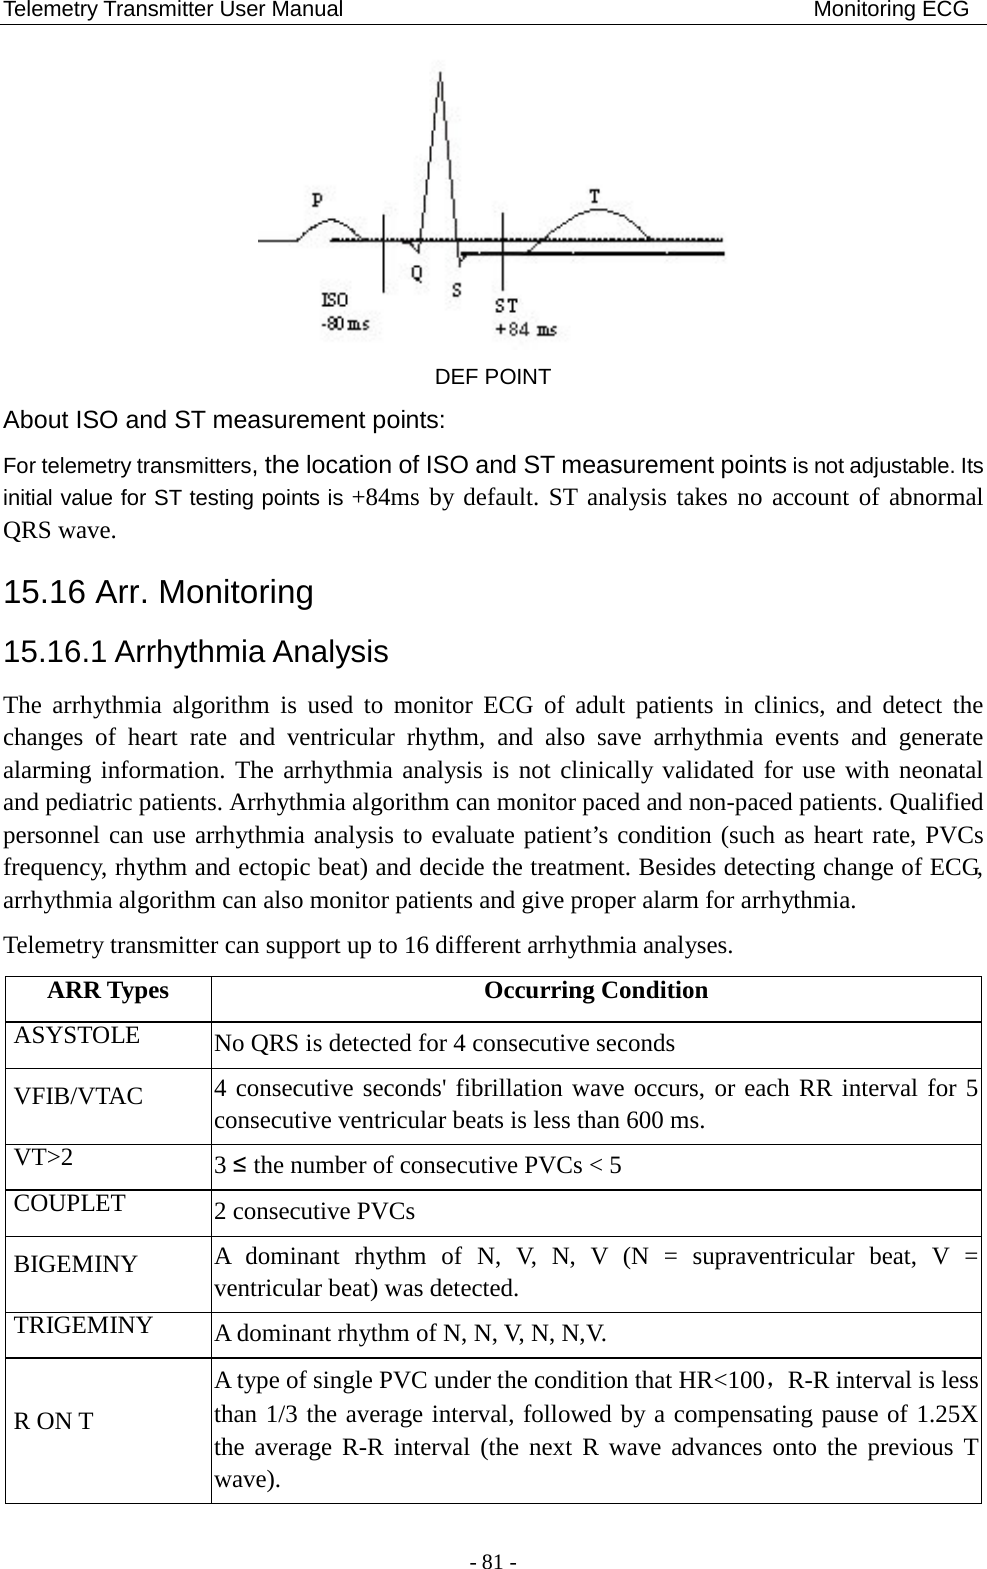 Telemetry Transmitter User Manual                                           Monitoring ECG  DEF POINT About ISO and ST measurement points: For telemetry transmitters, the location of ISO and ST measurement points is not adjustable. Its initial value for ST testing points is +84ms by default. ST analysis takes no account of abnormal QRS wave. 15.16 Arr. Monitoring 15.16.1 Arrhythmia Analysis The arrhythmia algorithm is used to monitor ECG of adult patients in clinics, and detect the changes of heart rate and ventricular rhythm, and also save arrhythmia events and generate alarming information. The arrhythmia analysis is not clinically validated for use with neonatal and pediatric patients. Arrhythmia algorithm can monitor paced and non-paced patients. Qualified personnel can use arrhythmia analysis to evaluate patient’s condition (such as heart rate, PVCs frequency, rhythm and ectopic beat) and decide the treatment. Besides detecting change of ECG, arrhythmia algorithm can also monitor patients and give proper alarm for arrhythmia. Telemetry transmitter can support up to 16 different arrhythmia analyses. ARR Types Occurring Condition ASYSTOLE No QRS is detected for 4 consecutive seconds VFIB/VTAC 4 consecutive seconds&apos; fibrillation wave occurs, or each RR interval for 5 consecutive ventricular beats is less than 600 ms. VT&gt;2 3 ≤ the number of consecutive PVCs &lt; 5 COUPLET 2 consecutive PVCs BIGEMINY A dominant rhythm of N, V, N, V (N = supraventricular beat, V = ventricular beat) was detected. TRIGEMINY A dominant rhythm of N, N, V, N, N,V. R ON T A type of single PVC under the condition that HR&lt;100，R-R interval is less than 1/3 the average interval, followed by a compensating pause of 1.25X the average R-R interval (the next R wave advances onto the previous T wave). - 81 - 